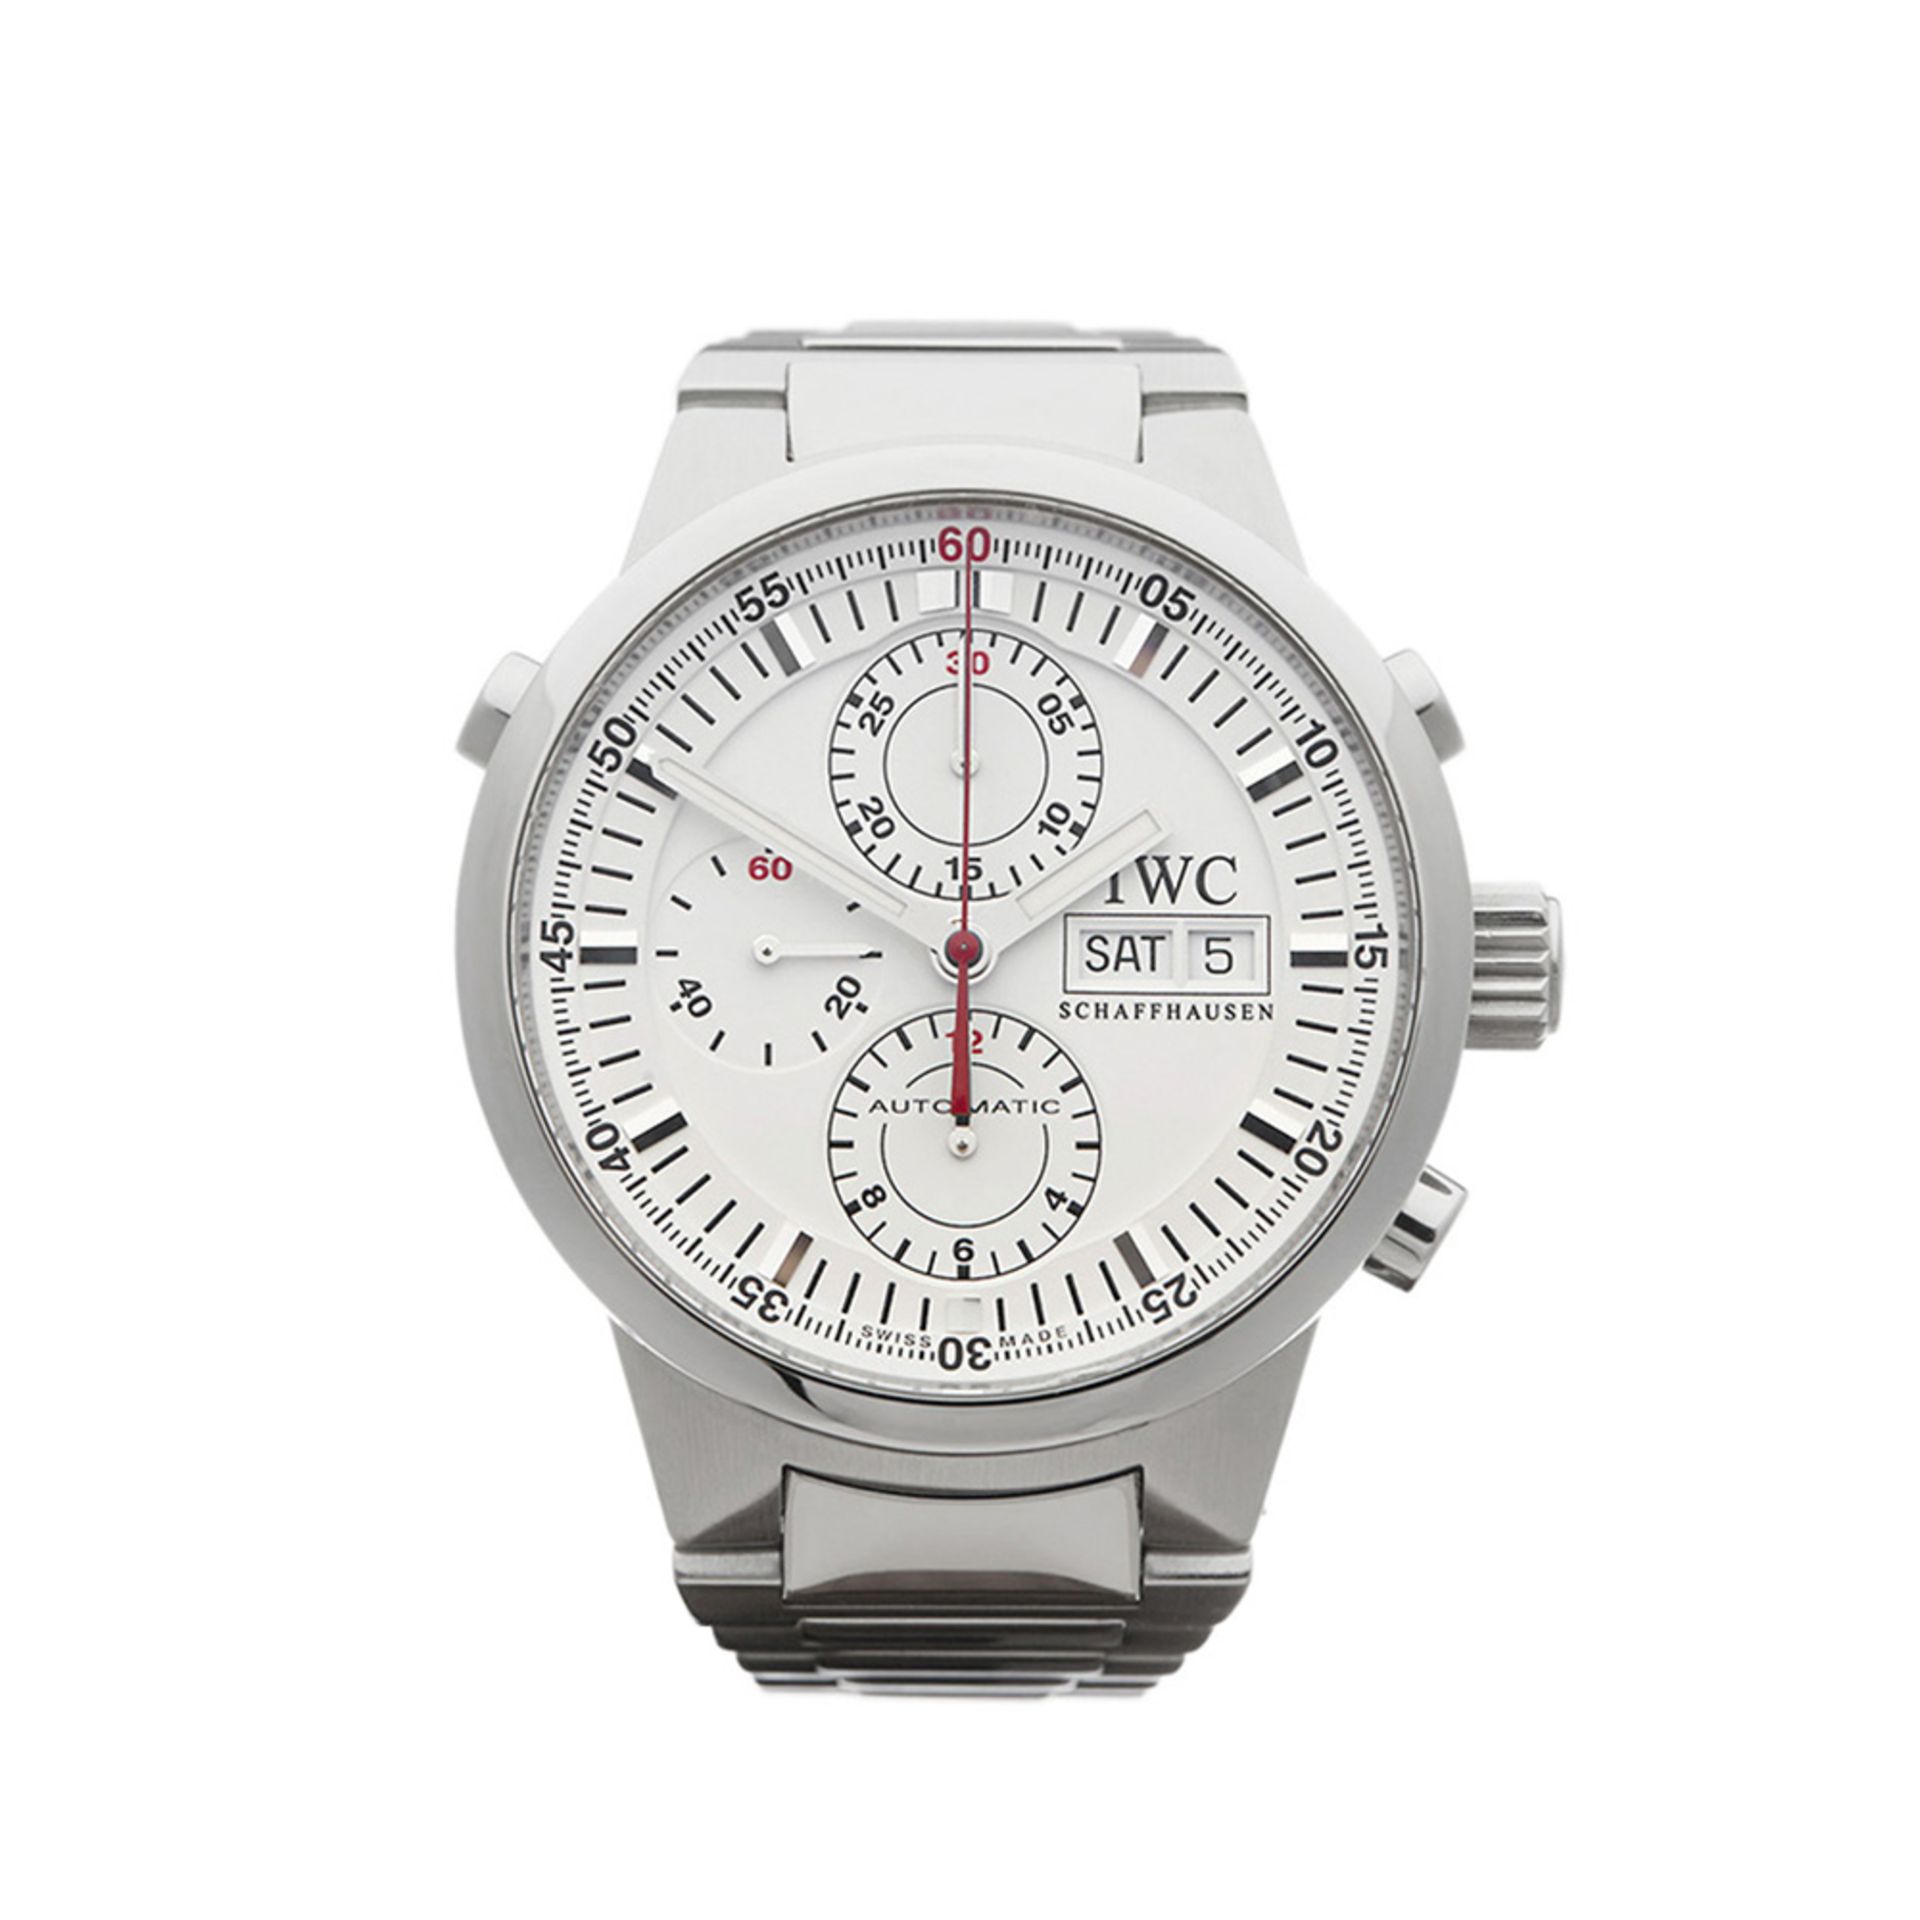 2000 IWC GST Rattrapante Chronograph 43mm Stainless Steel - IW371523 - Image 5 of 8